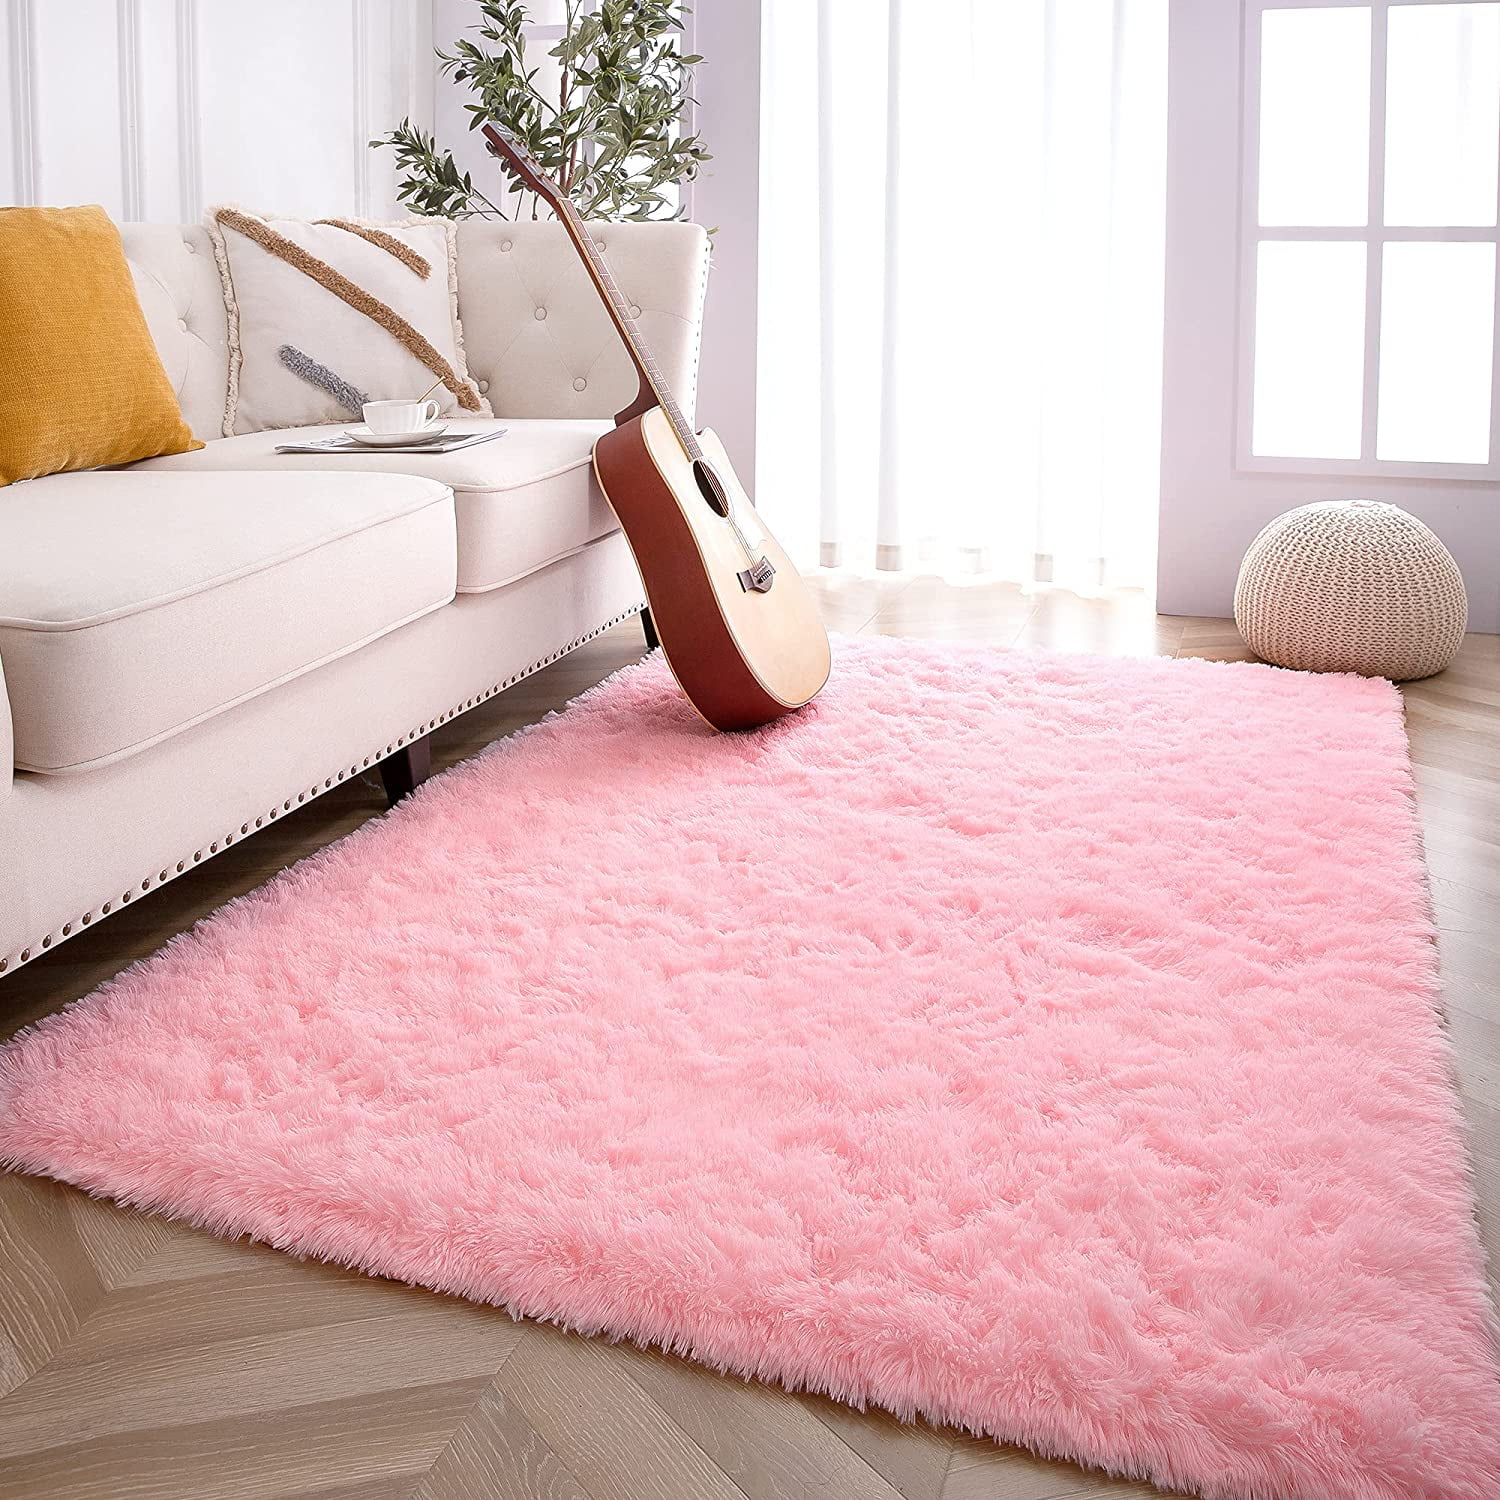 Rainlin Shaggy 5.3x6.6 Area Rug Modern Indoor Plush Fluffy Rugs, Extra Soft Comfy Carpets, Cute Cozy Area Rugs for Bedroom Living Room Girls Boys Kids